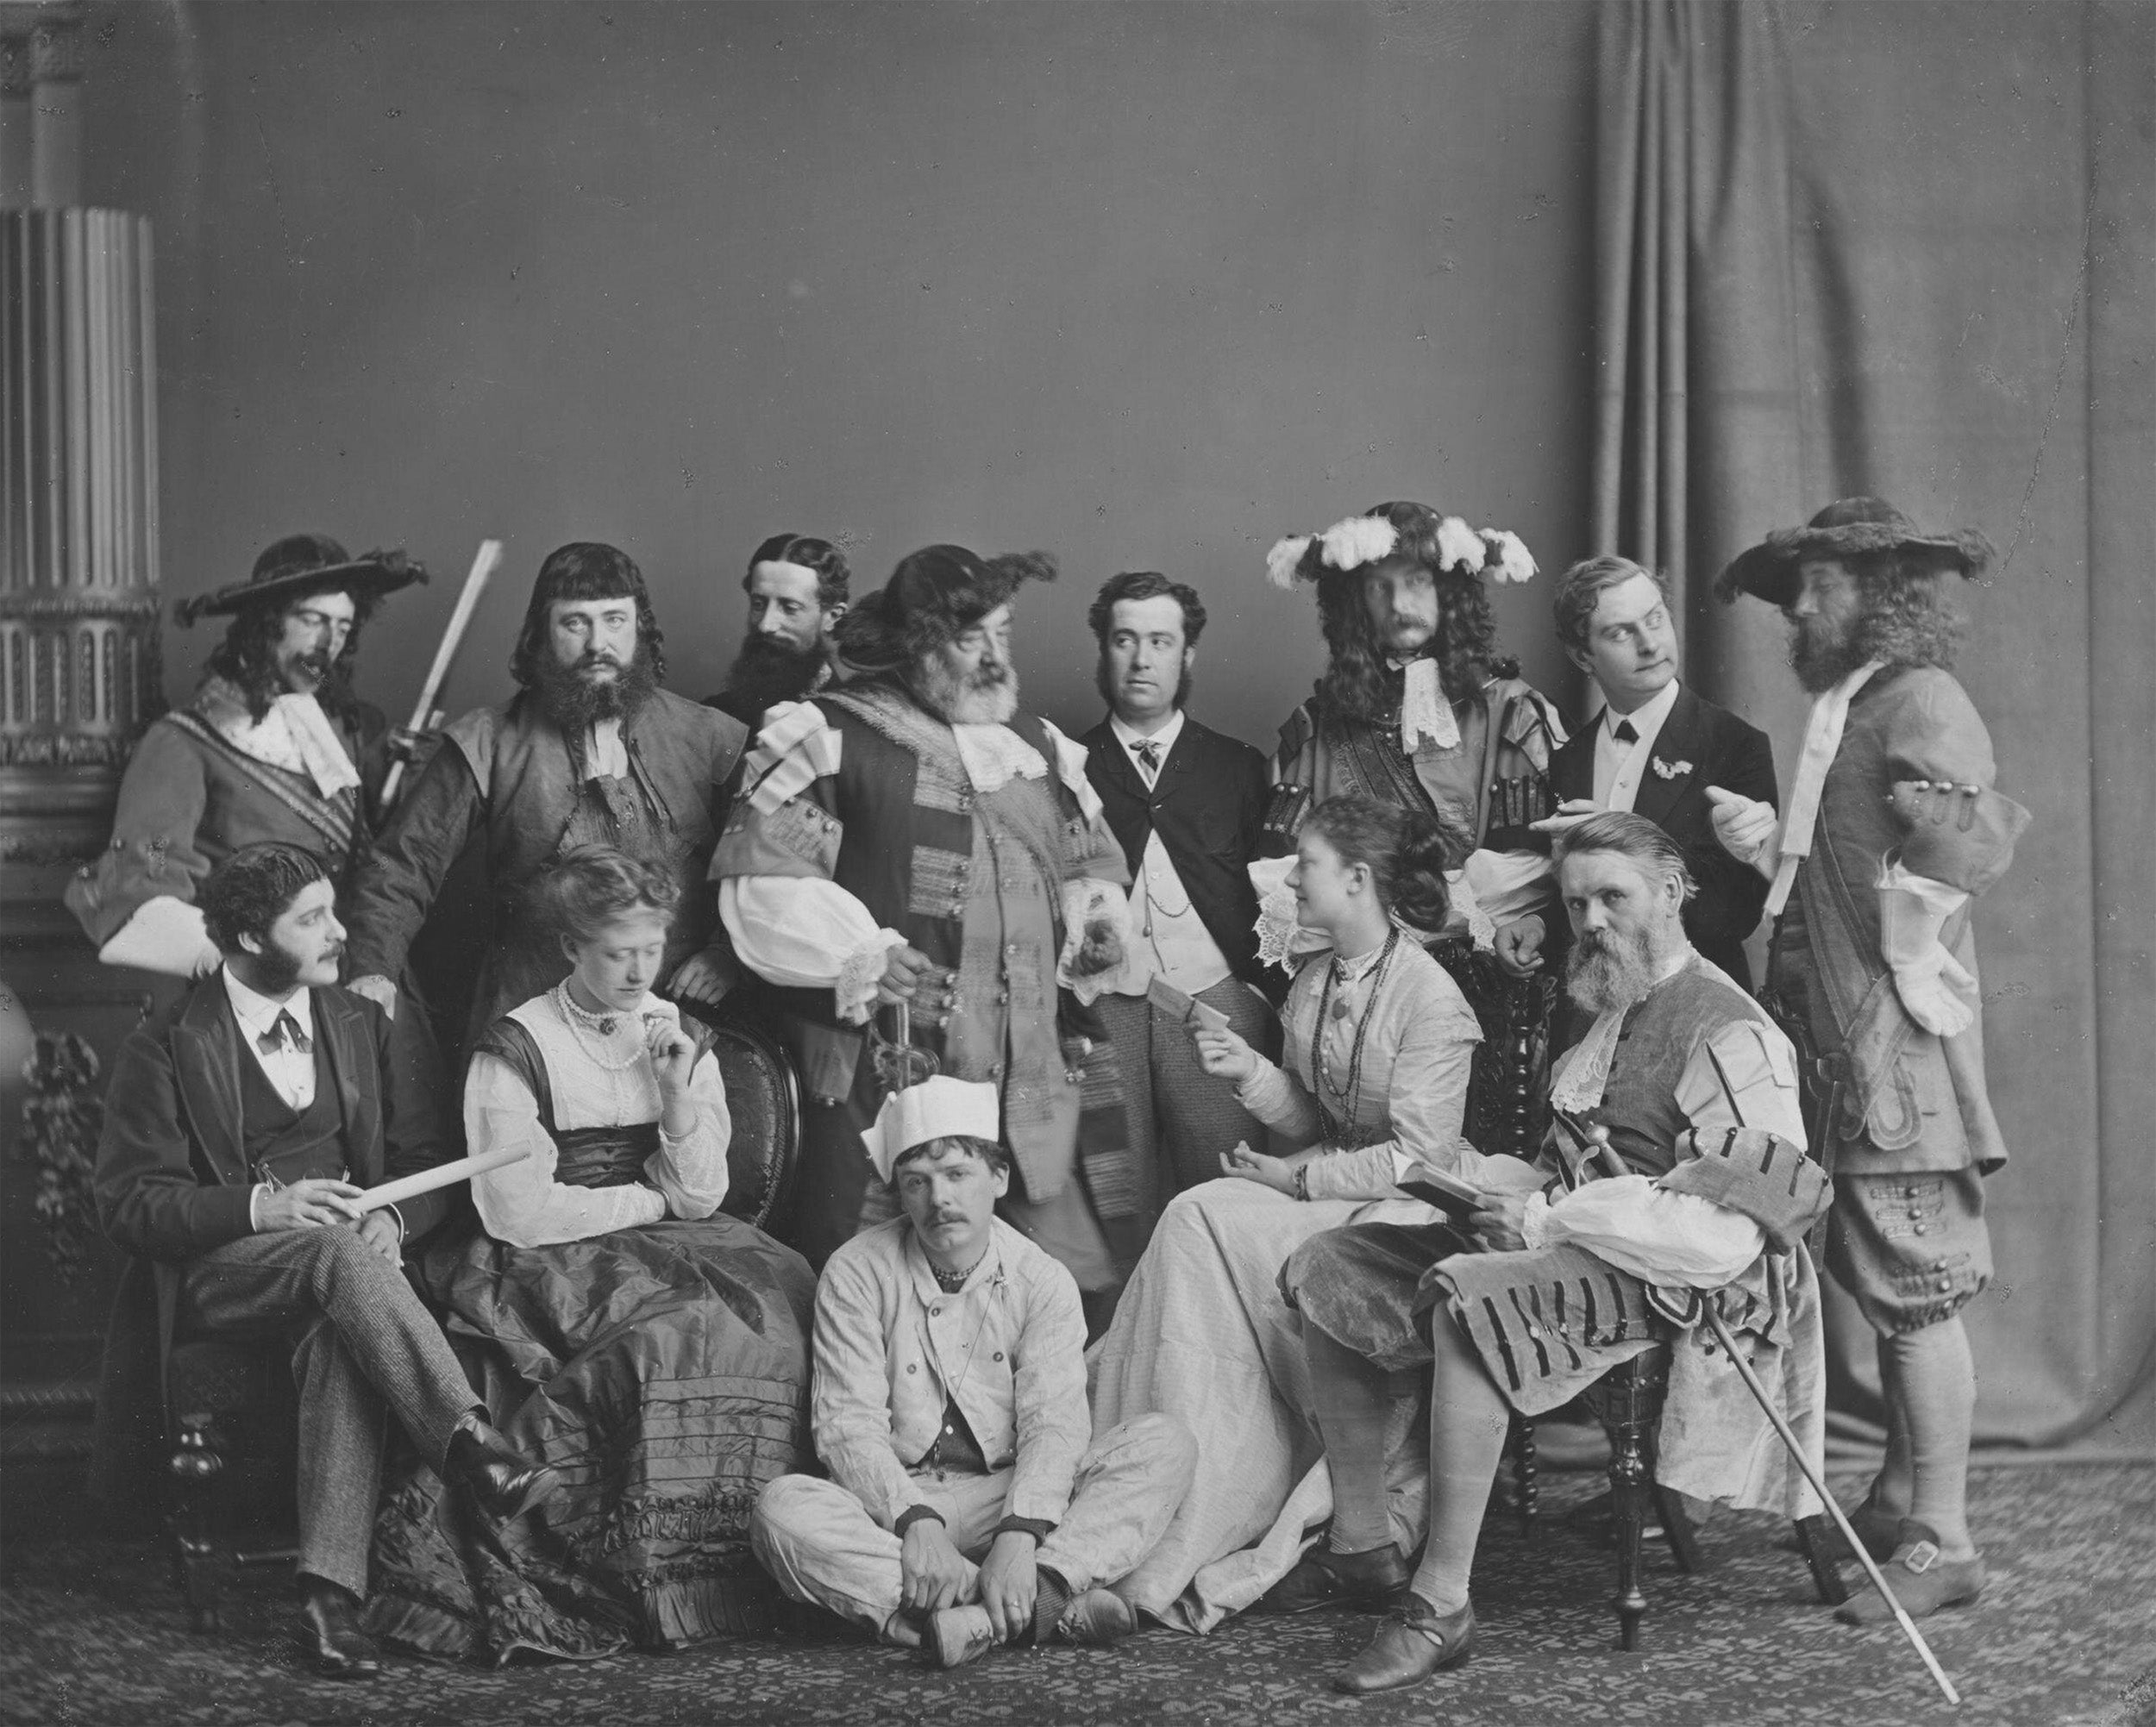 The Green Room, photograph by the London Stereoscopic Company of performers at a benefit for the widow of Charles Bennett at the Adelphi Theatre, 1867, collection of the Victoria & Albert Museum, London